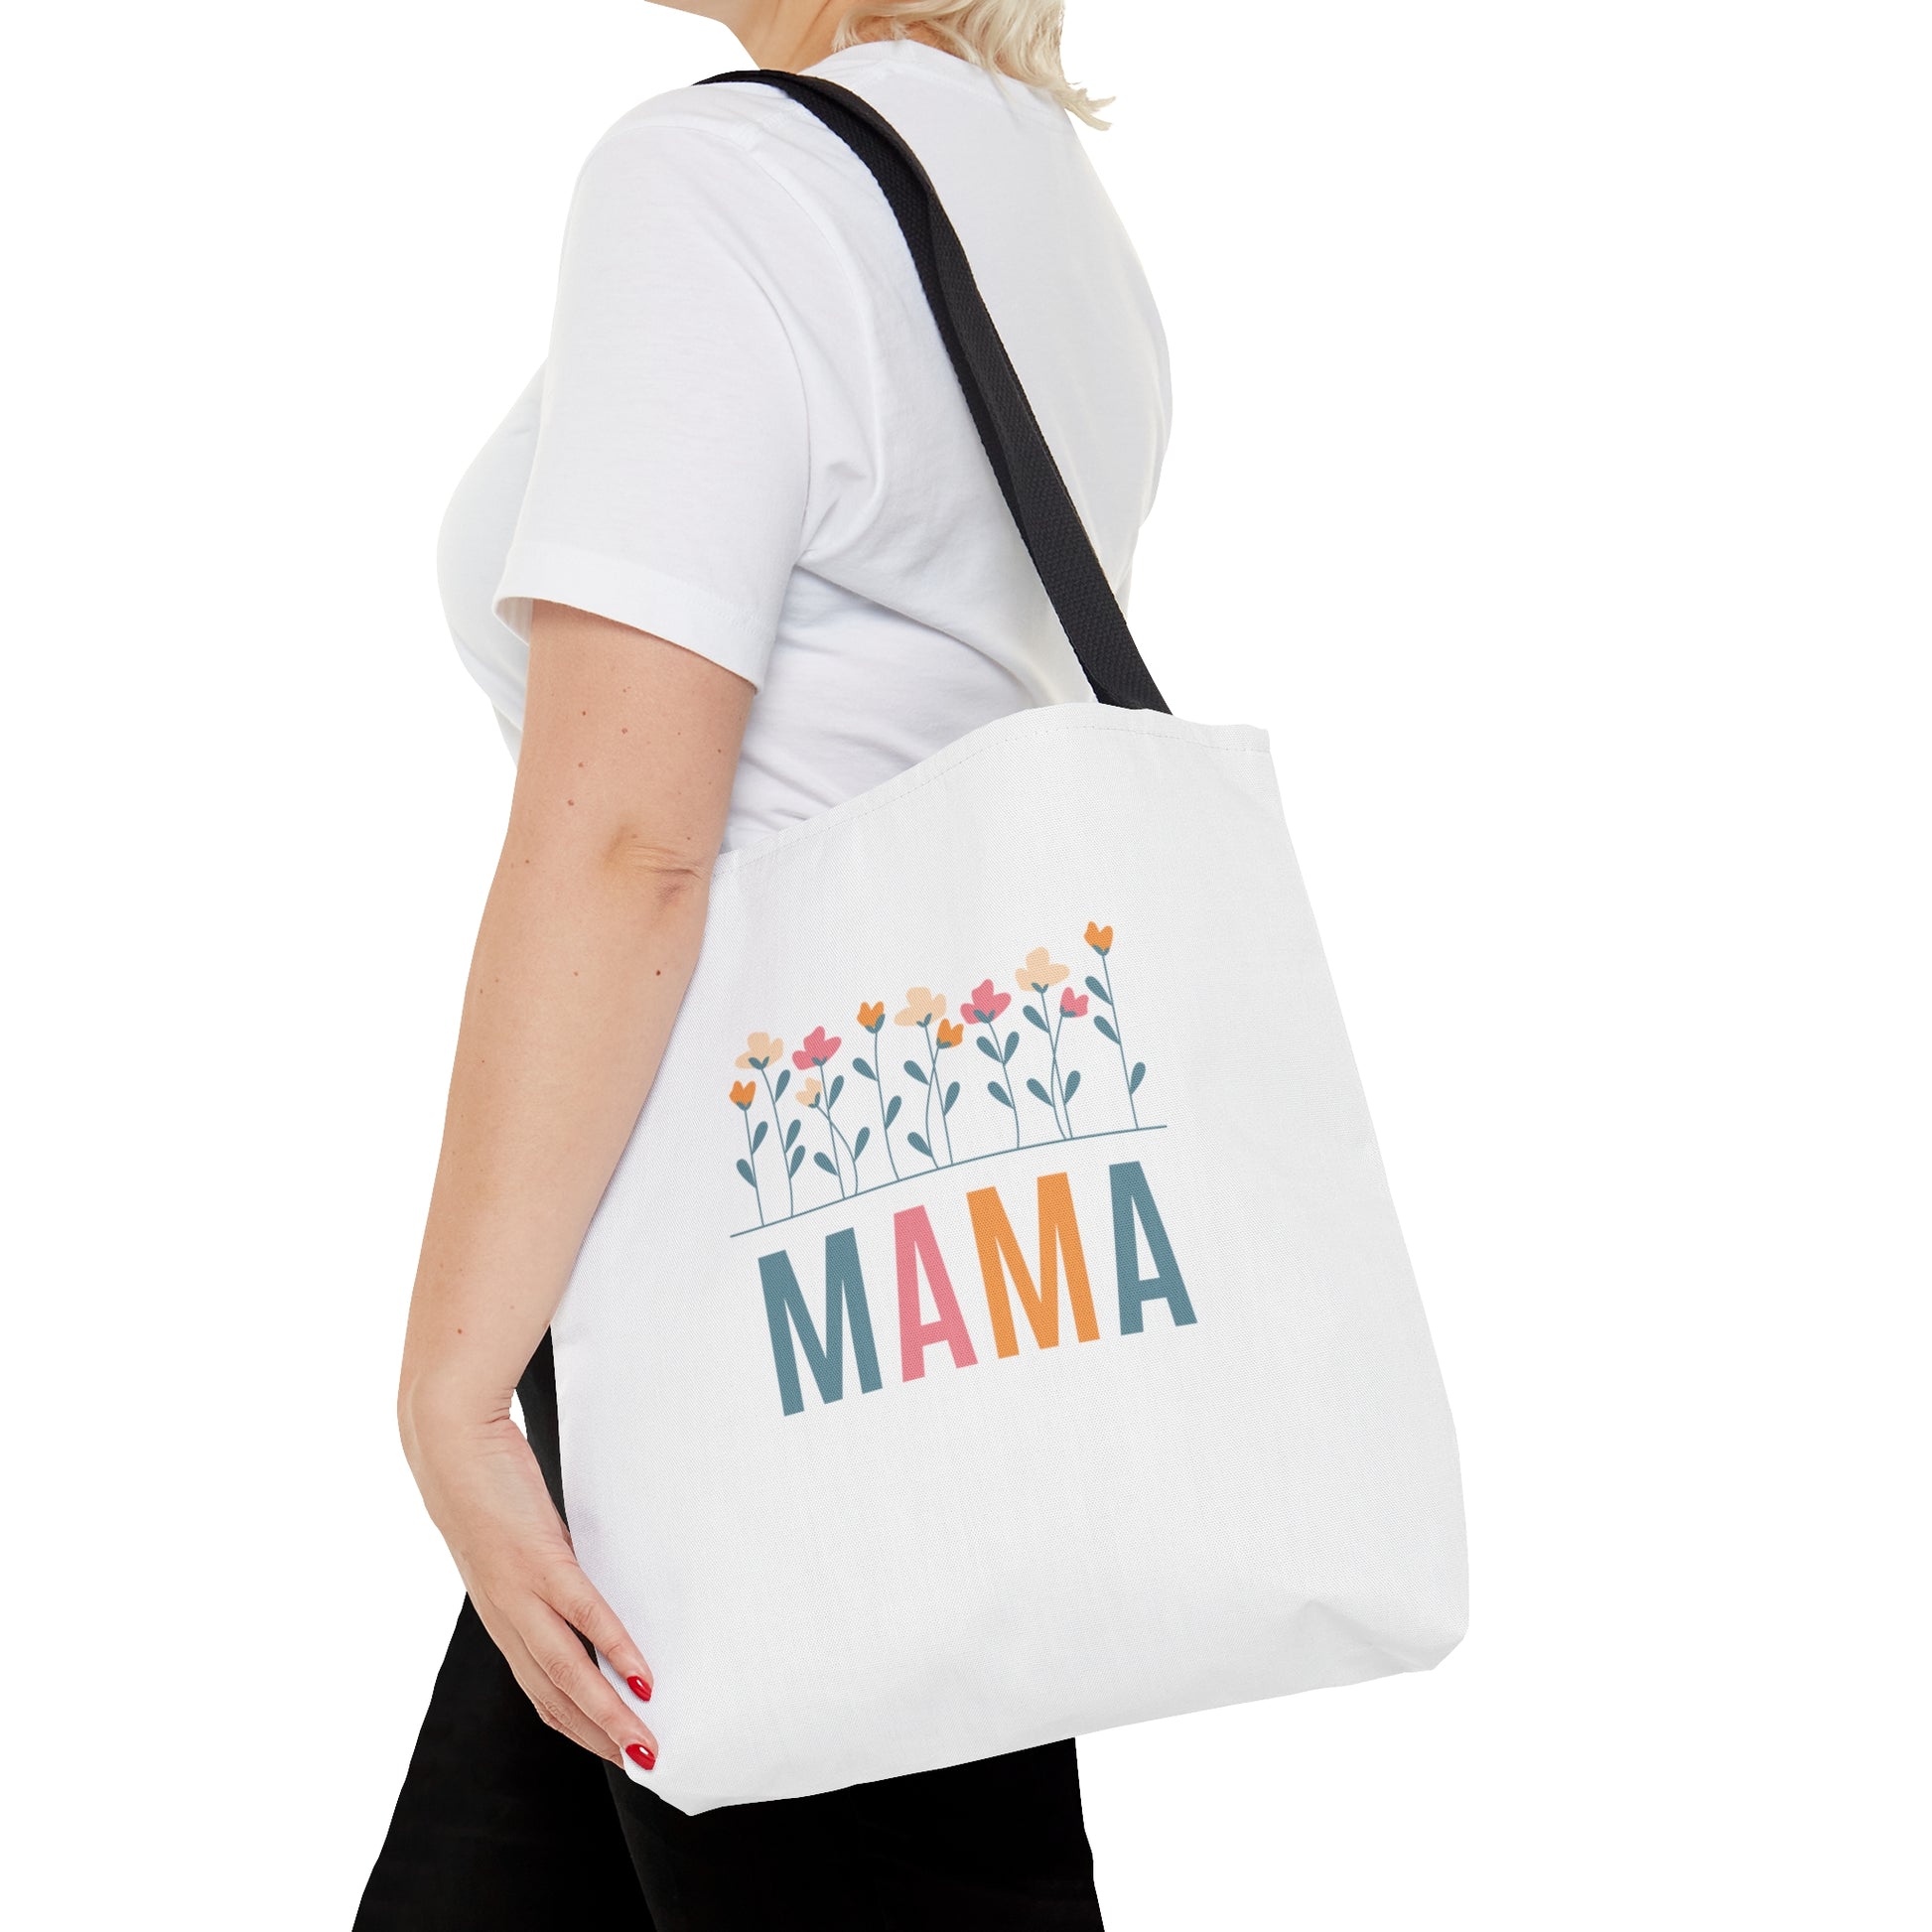 Tote bag with the word MAMA and flowers above it.